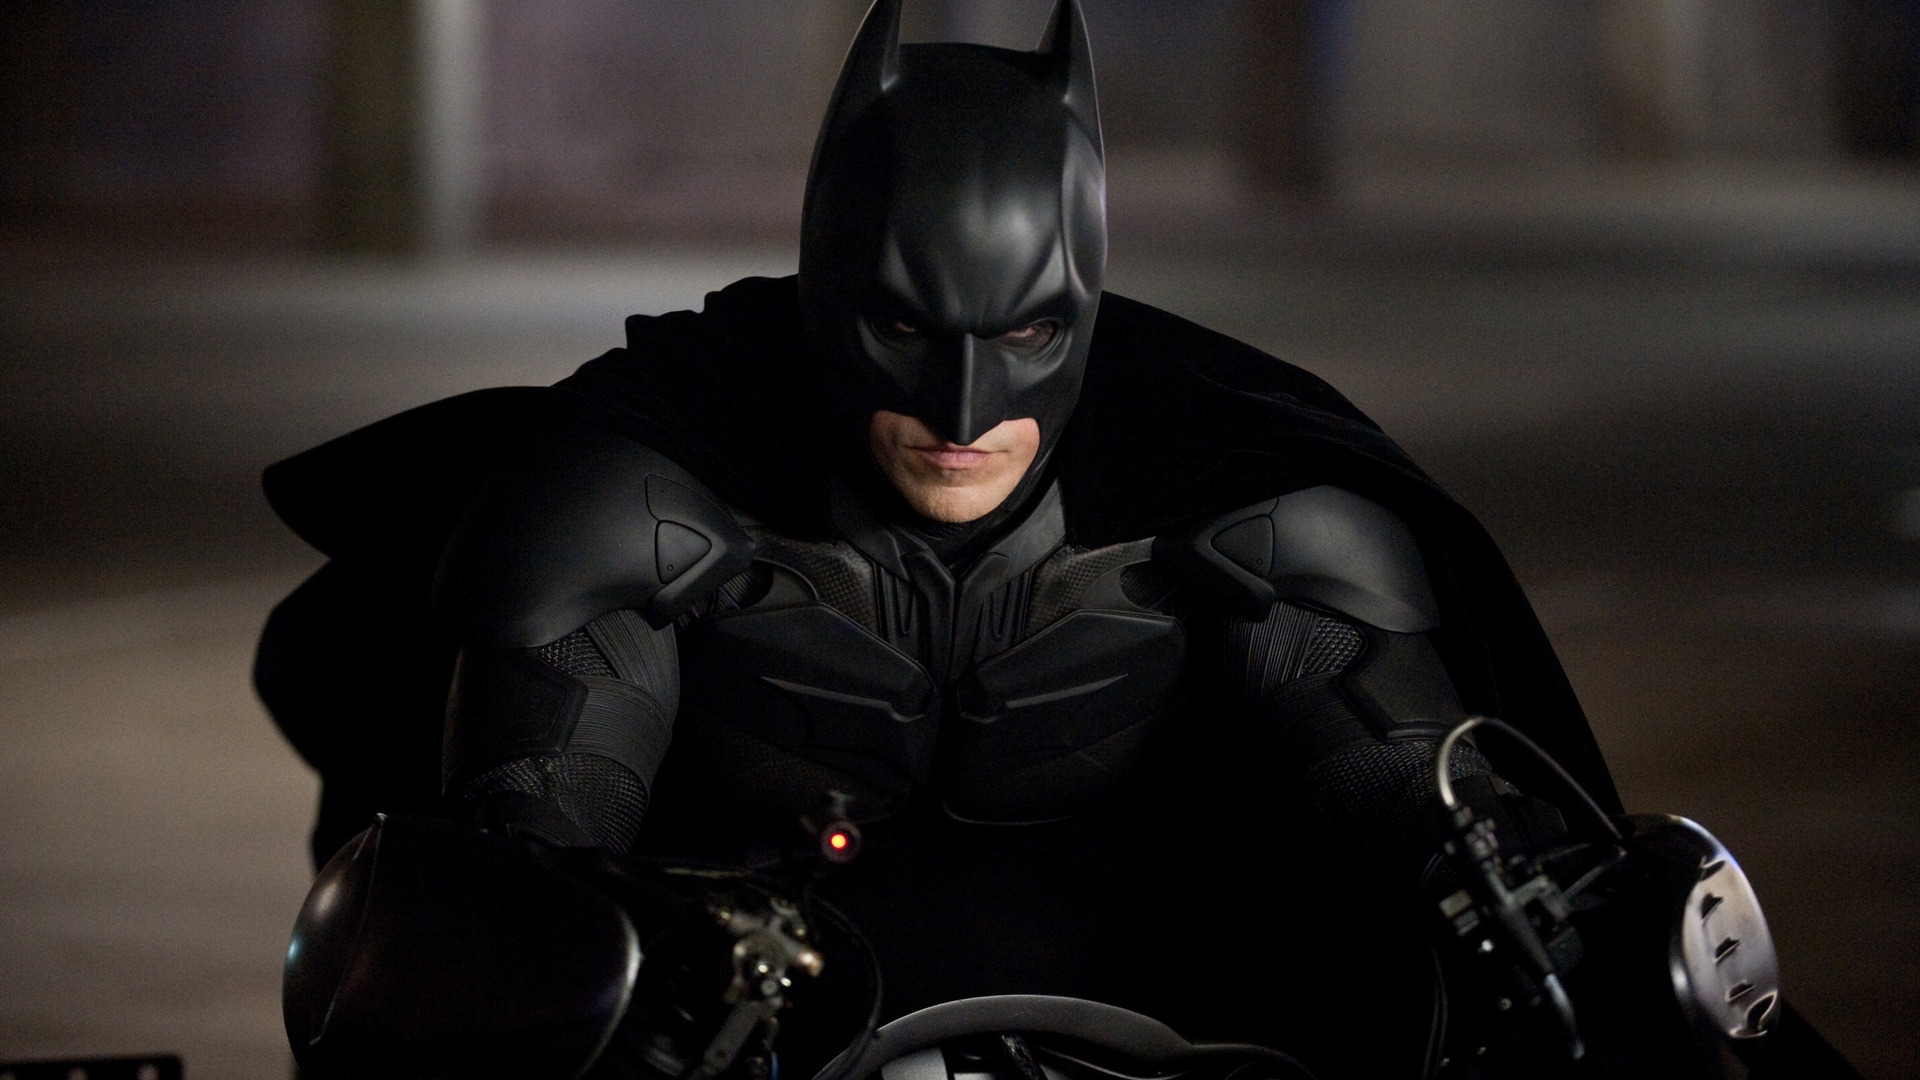 Angry Batman for 1920 x 1080 HDTV 1080p resolution